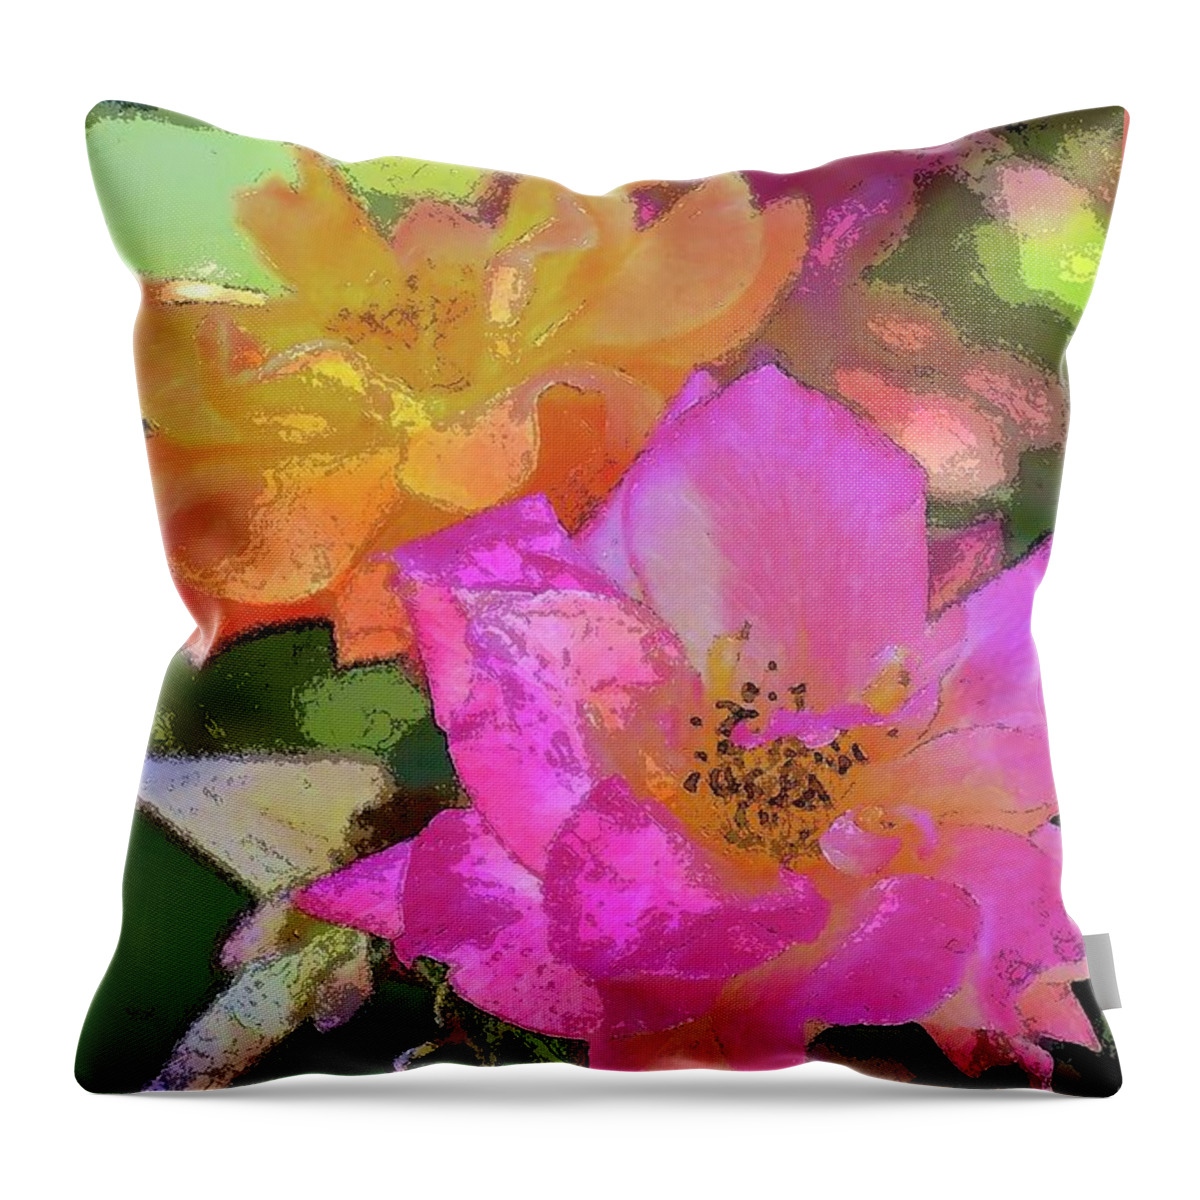 Floral Throw Pillow featuring the photograph Rose 114 by Pamela Cooper